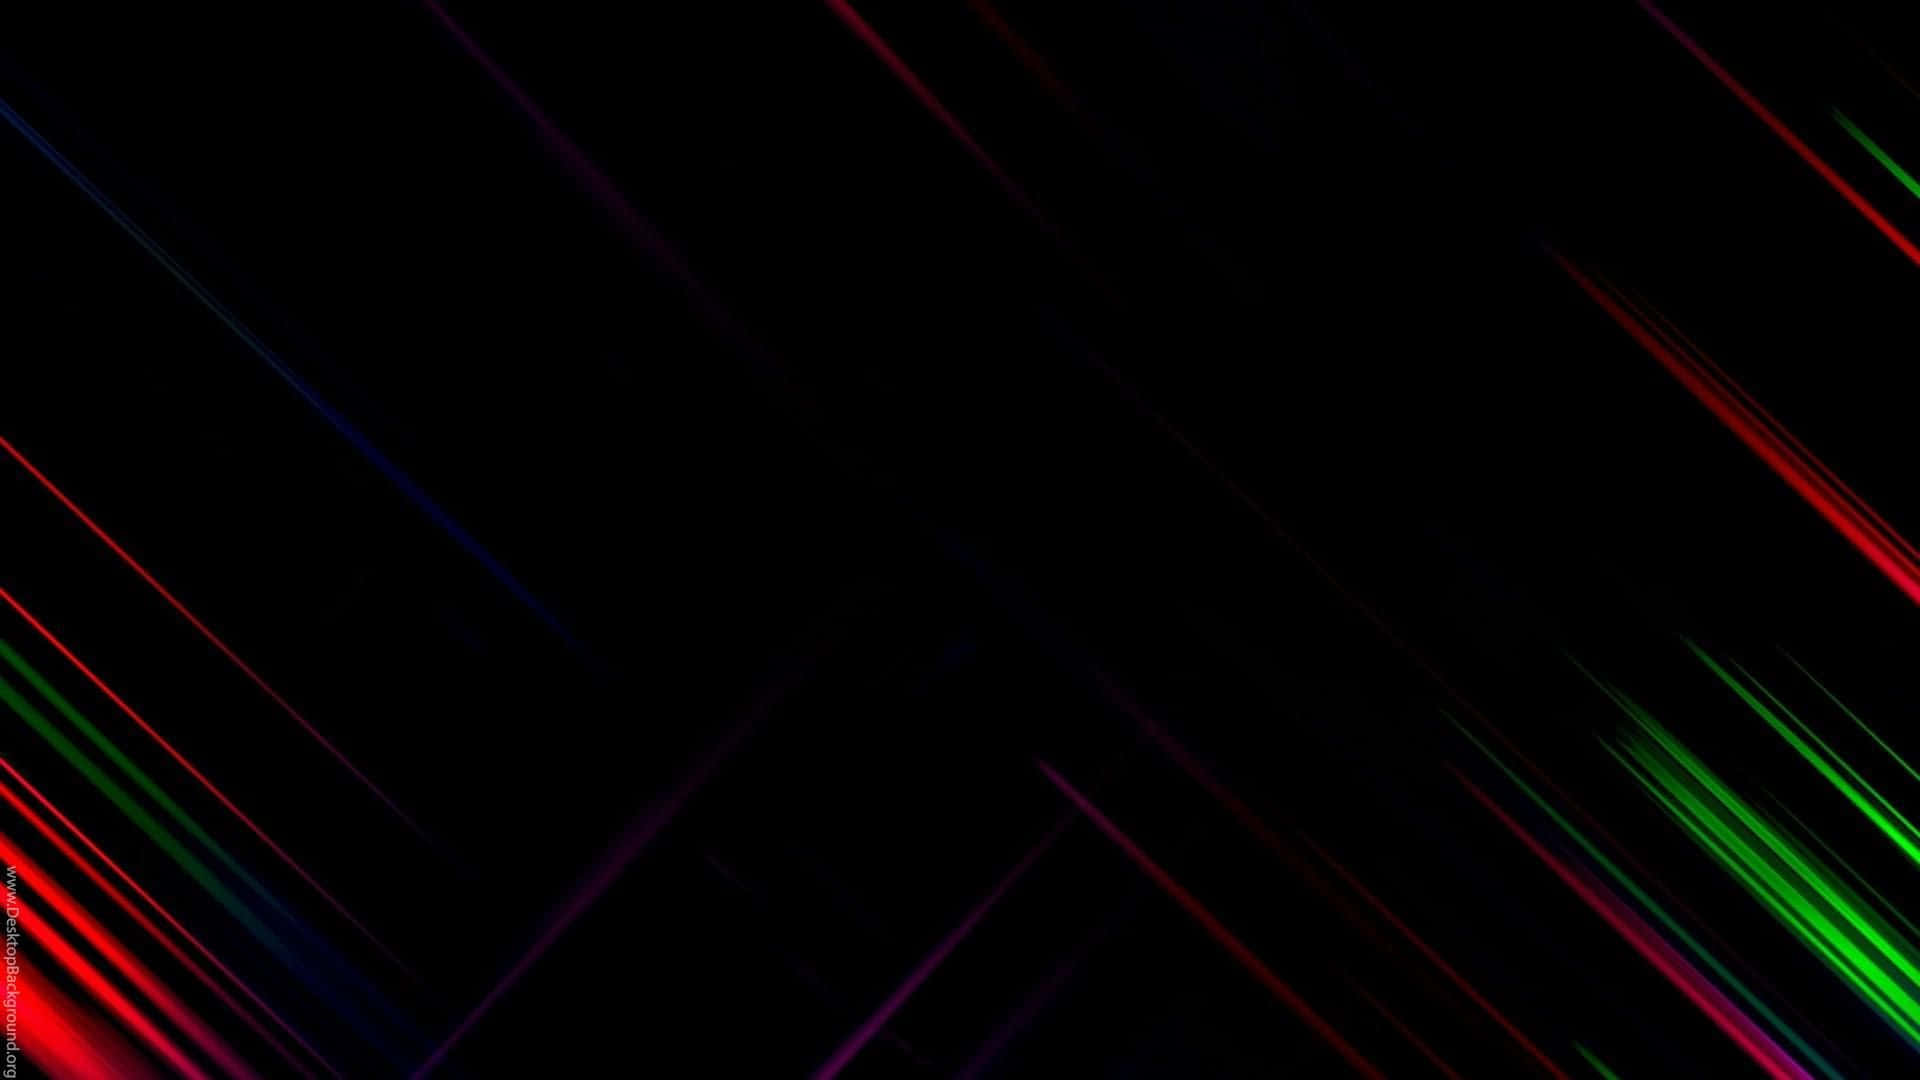 Download A Black Background With Colorful Lines | Wallpapers.com